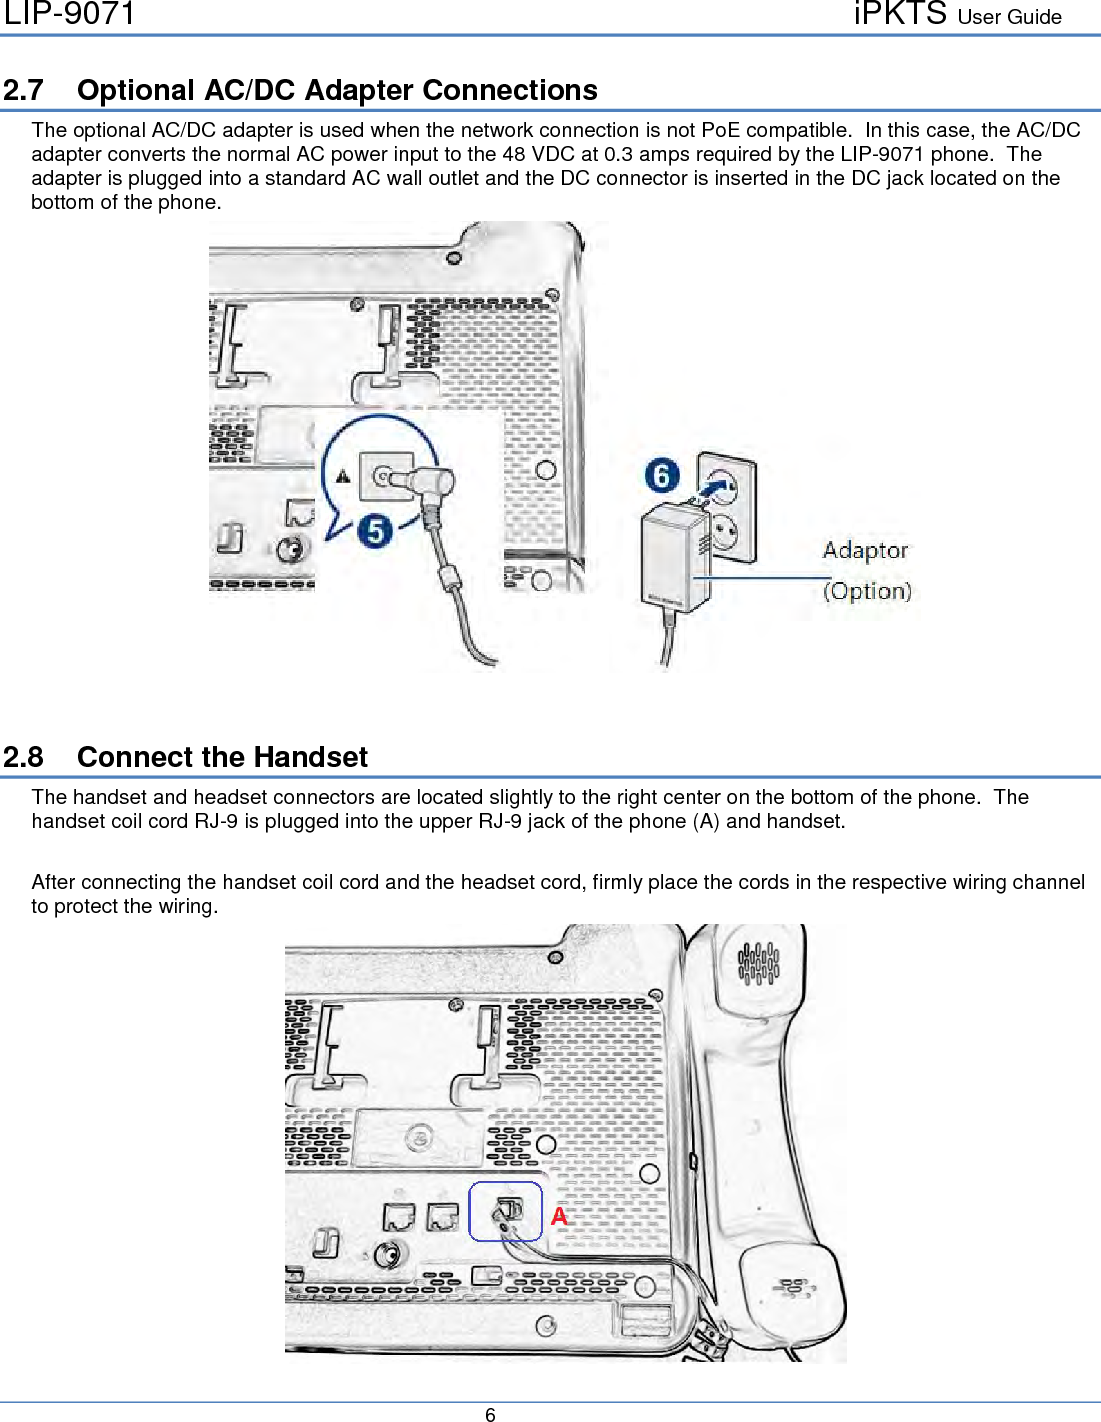 LIP-9071     iPKTS User Guide      6   2.7 Optional AC/DC Adapter Connections The optional AC/DC adapter is used when the network connection is not PoE compatible.  In this case, the AC/DC adapter converts the normal AC power input to the 48 VDC at 0.3 amps required by the LIP-9071 phone.  The adapter is plugged into a standard AC wall outlet and the DC connector is inserted in the DC jack located on the bottom of the phone.    2.8 Connect the Handset The handset and headset connectors are located slightly to the right center on the bottom of the phone.  The handset coil cord RJ-9 is plugged into the upper RJ-9 jack of the phone (A) and handset.   After connecting the handset coil cord and the headset cord, firmly place the cords in the respective wiring channel to protect the wiring.   